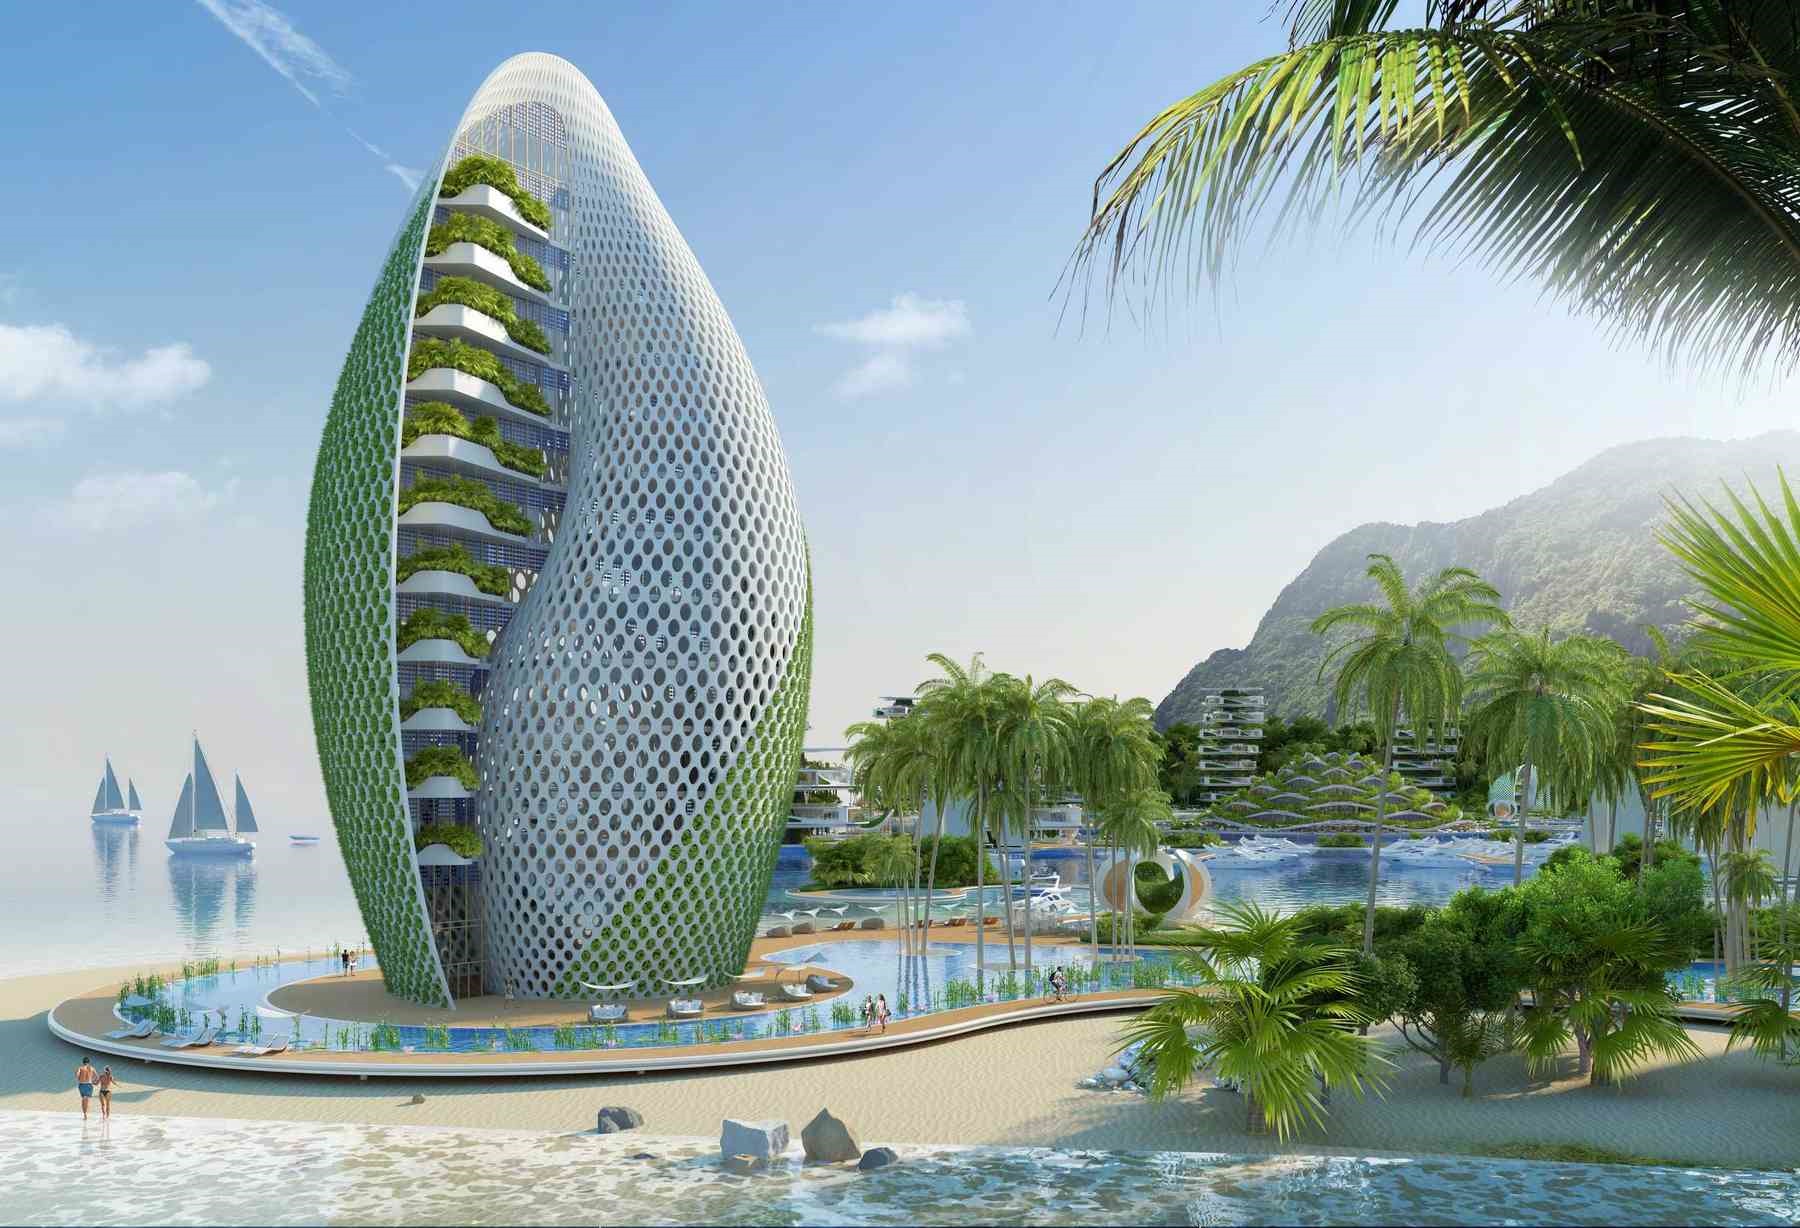 [TRENDING] This Design of Eco-Resort in PH Could Be What Hotels Will Look Like in the Future